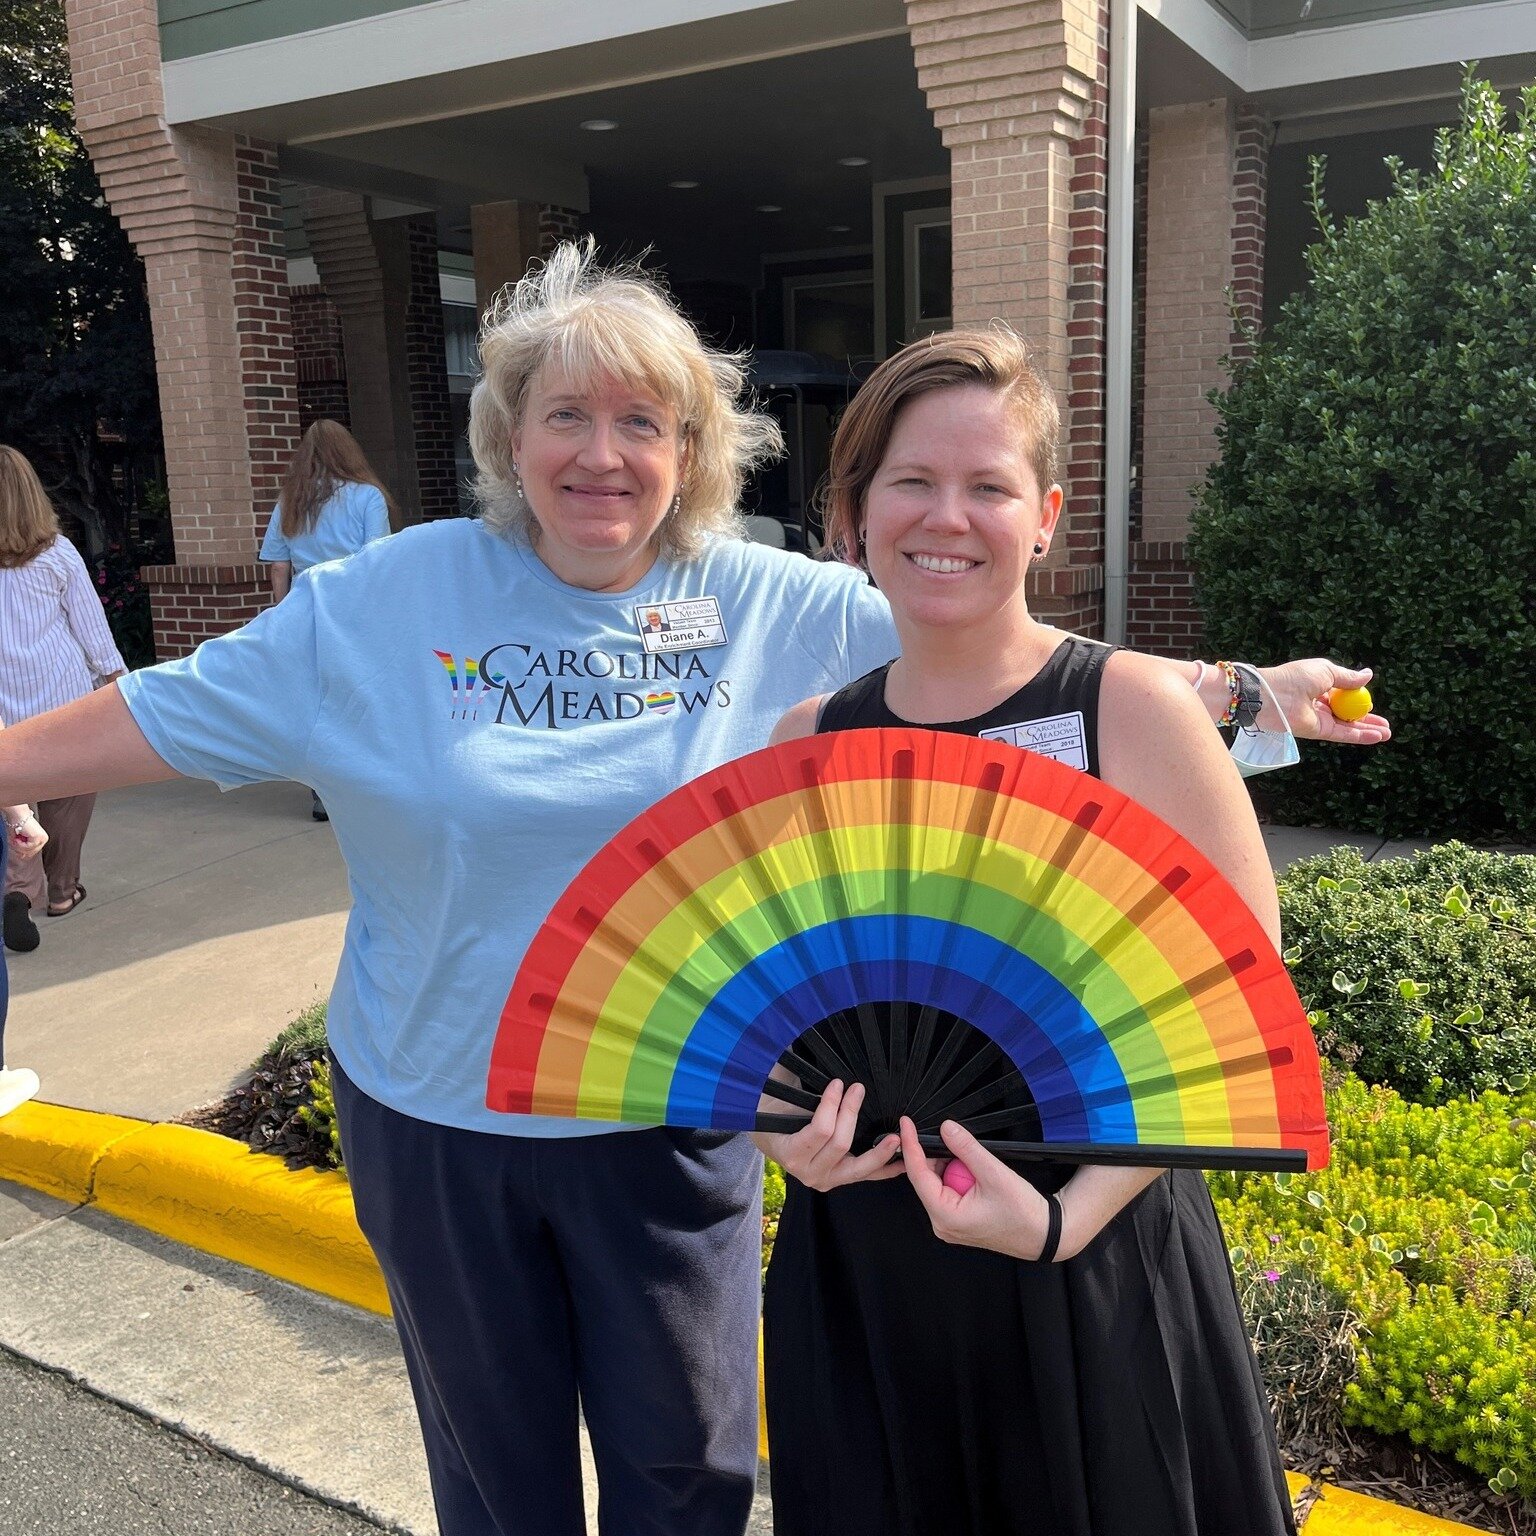 June is LGBTQIA+ Pride month and we wanted to gather to recognize, gather and reflect on this occasion. At Carolina Meadows, we celebrate love, diversity, acceptance and pride - all are welcome in our community. This is an important message for anyon